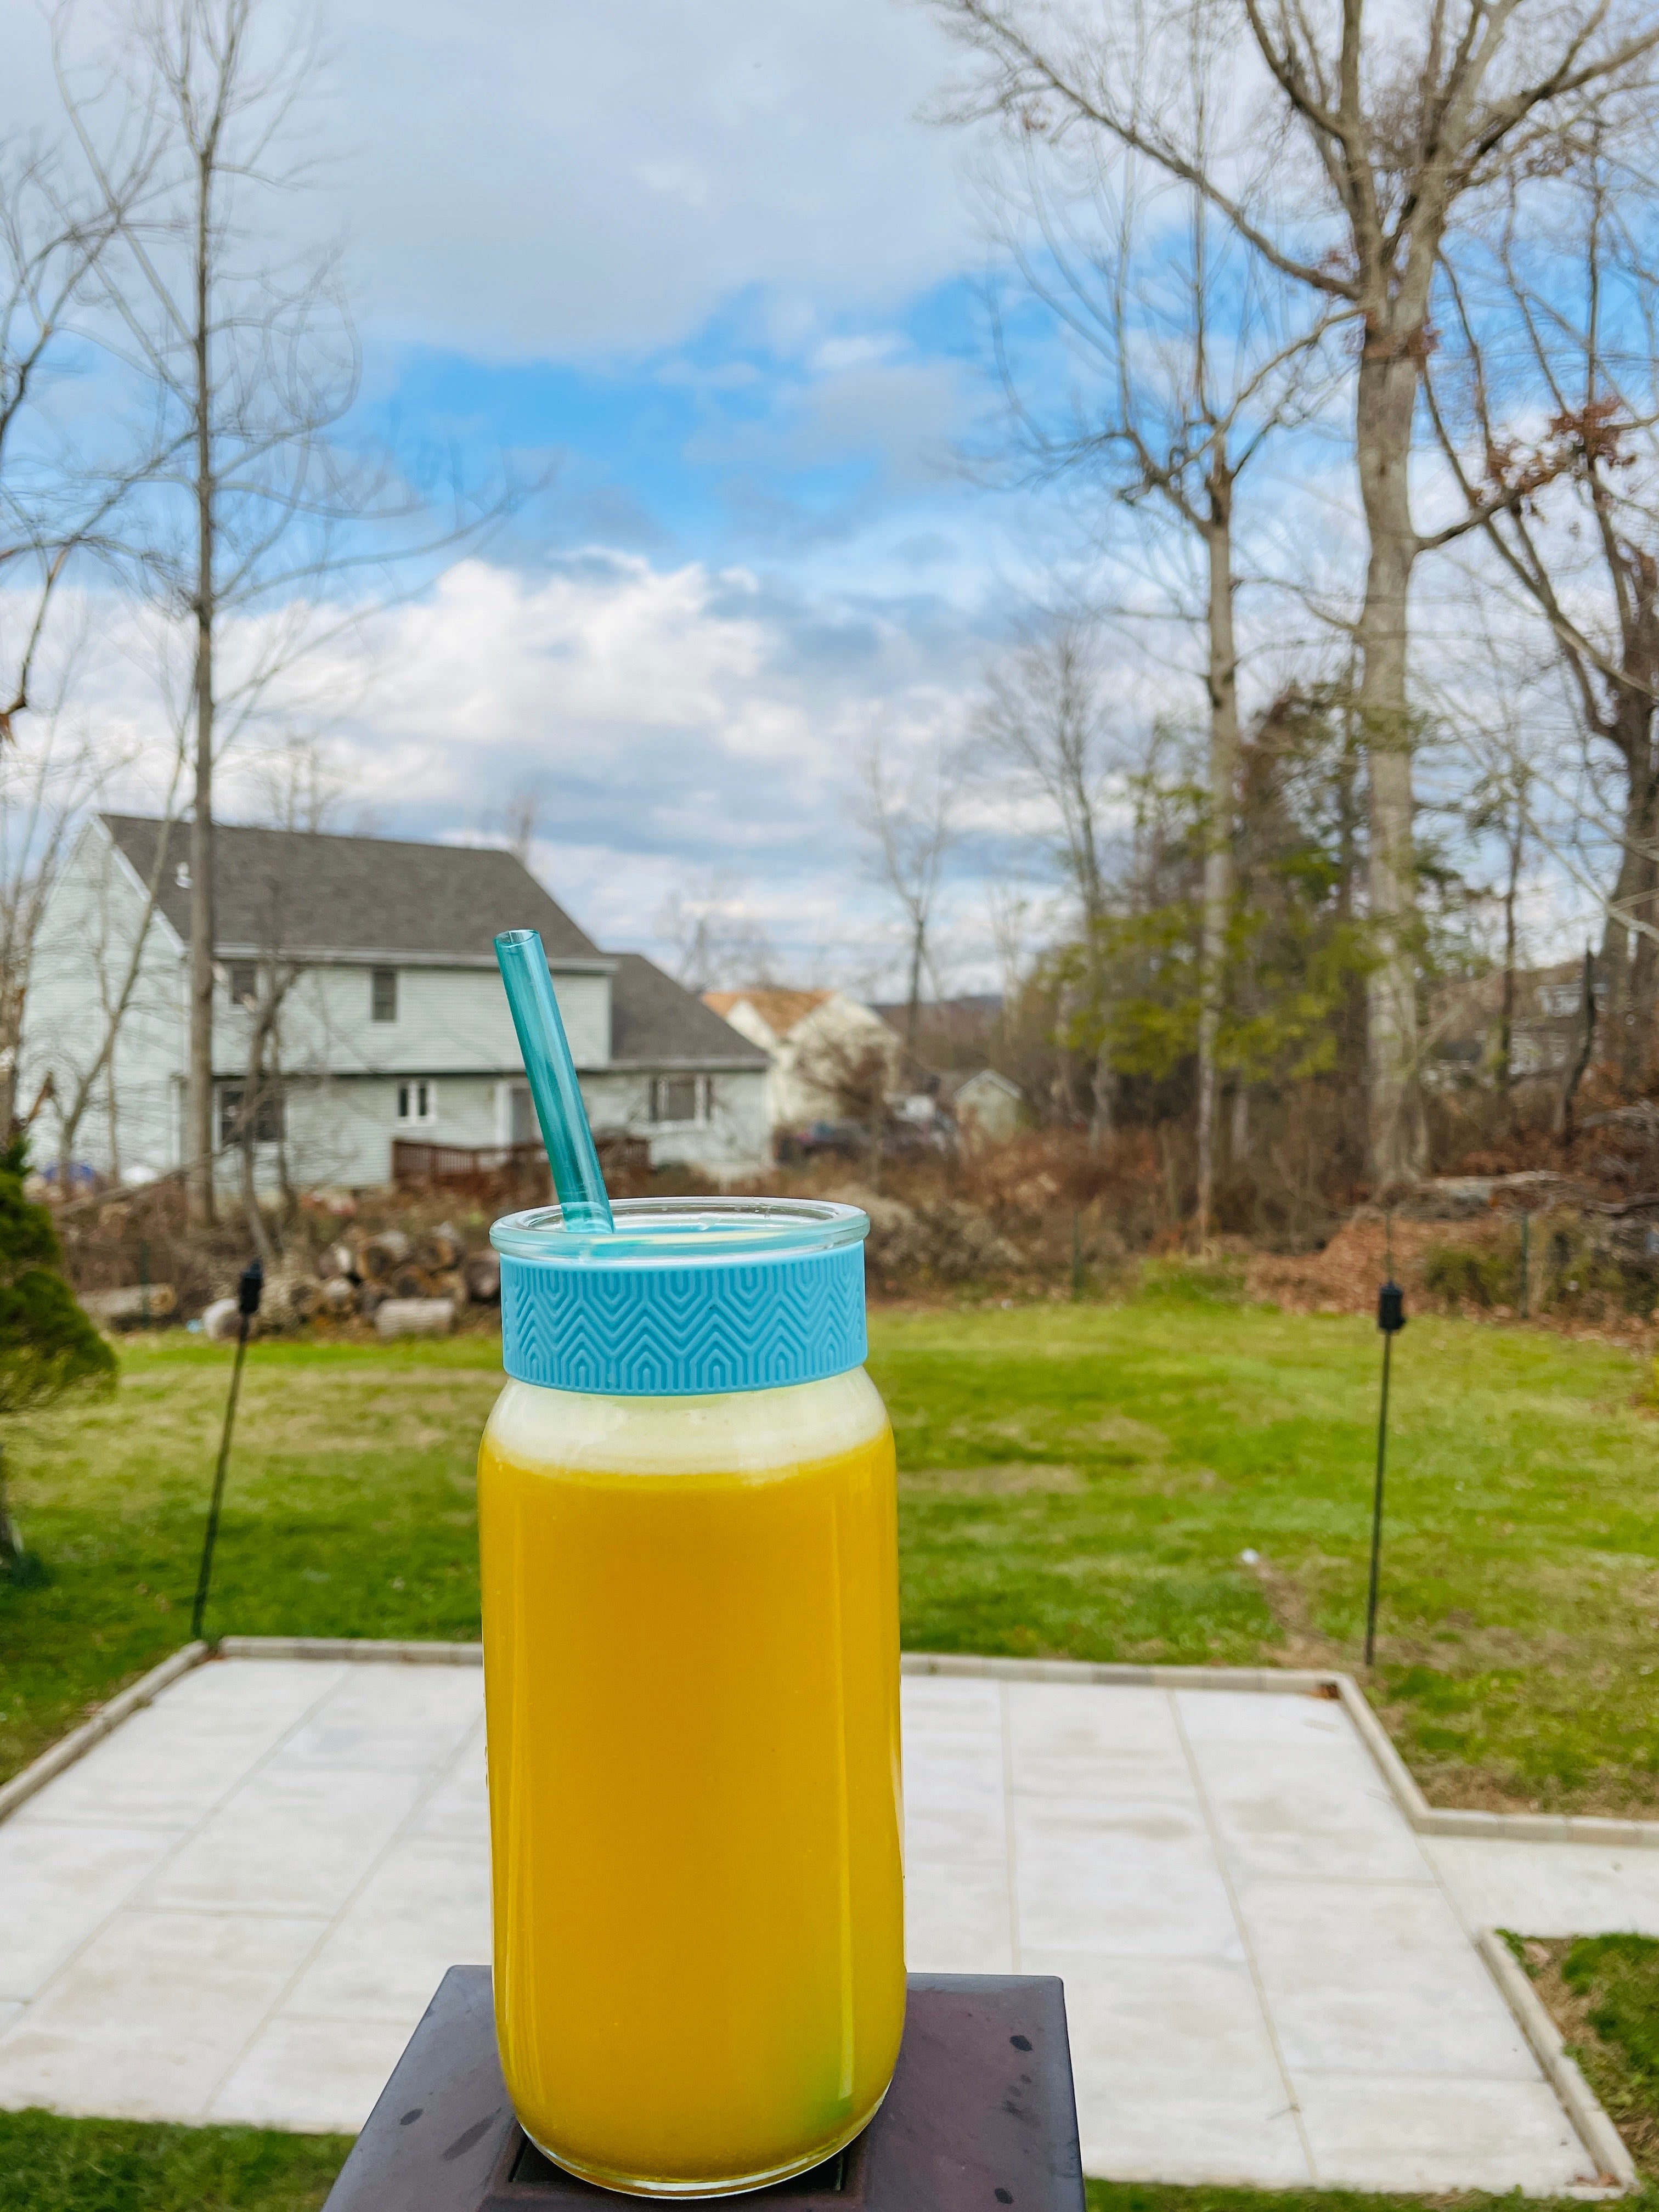 Refreshing pineapple and ginger juice on a sunny day